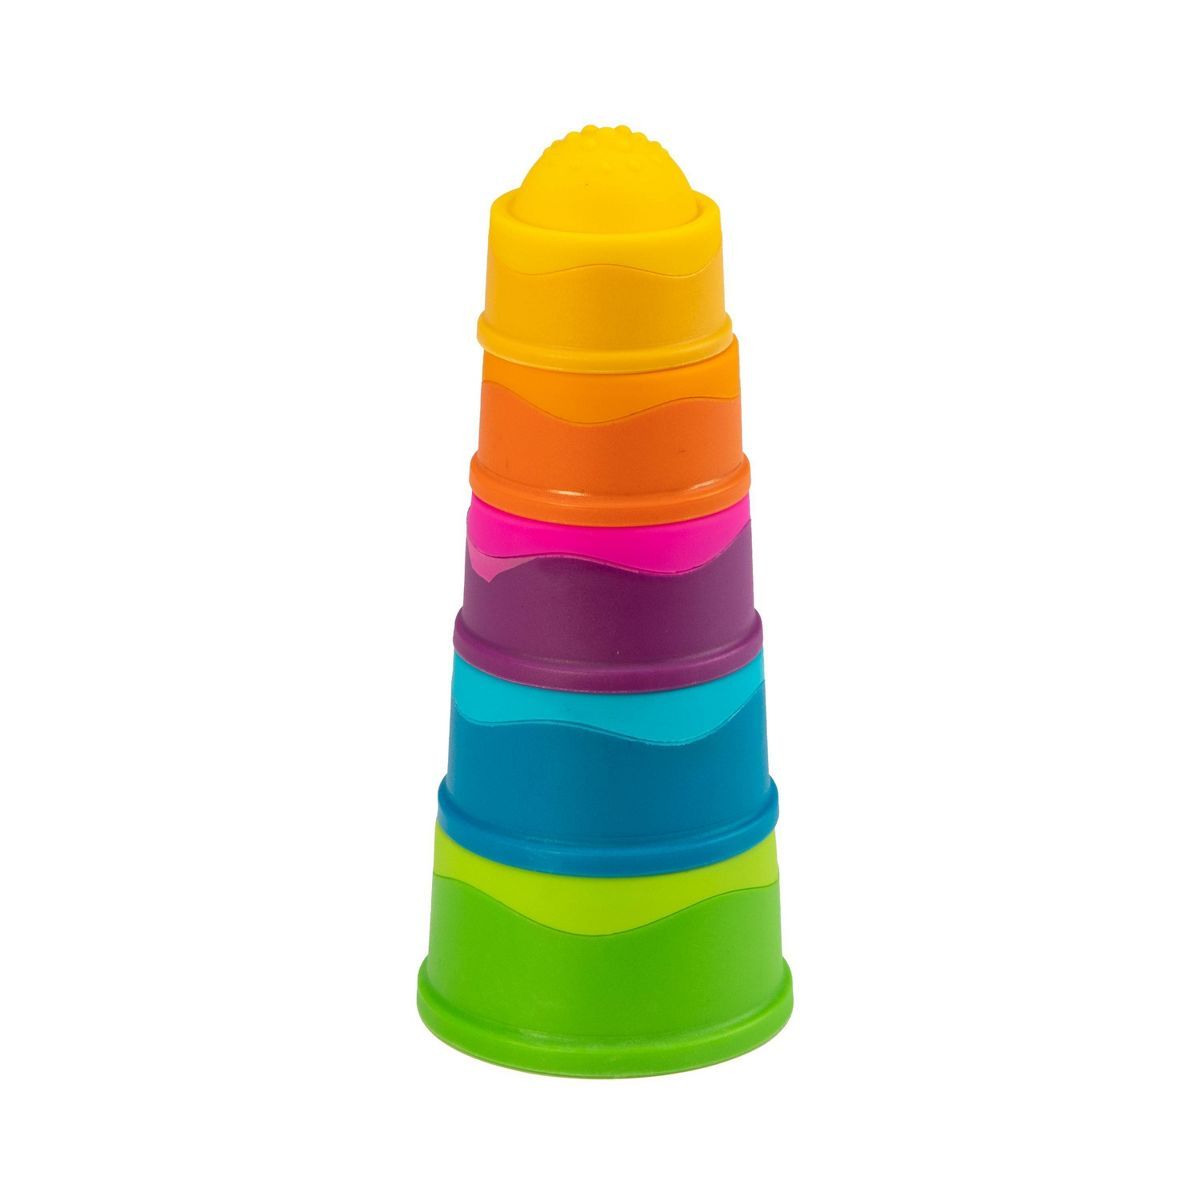 Fat Brain Toys Dimpl Stack Toy - 5 Stacking Cups | Target